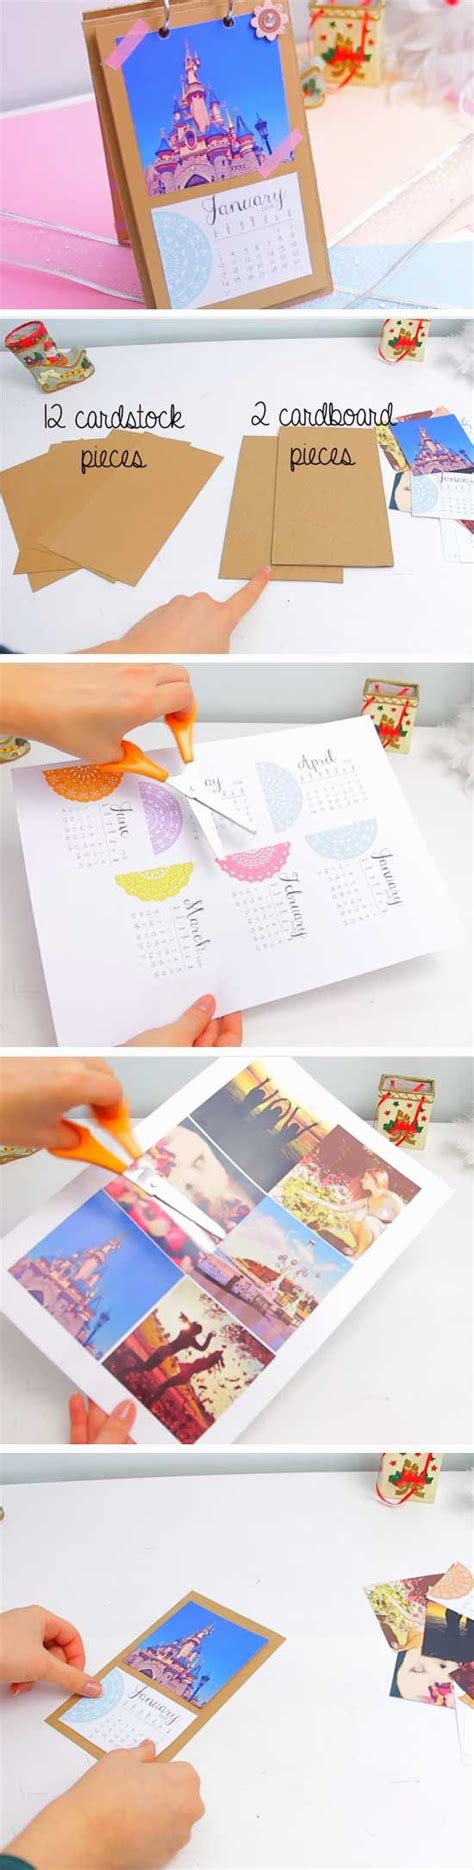 Paper last minute homemade birthday gifts for dad easy. Last Minute Diy Christmas Gifts For Mom And Dad - Home ...